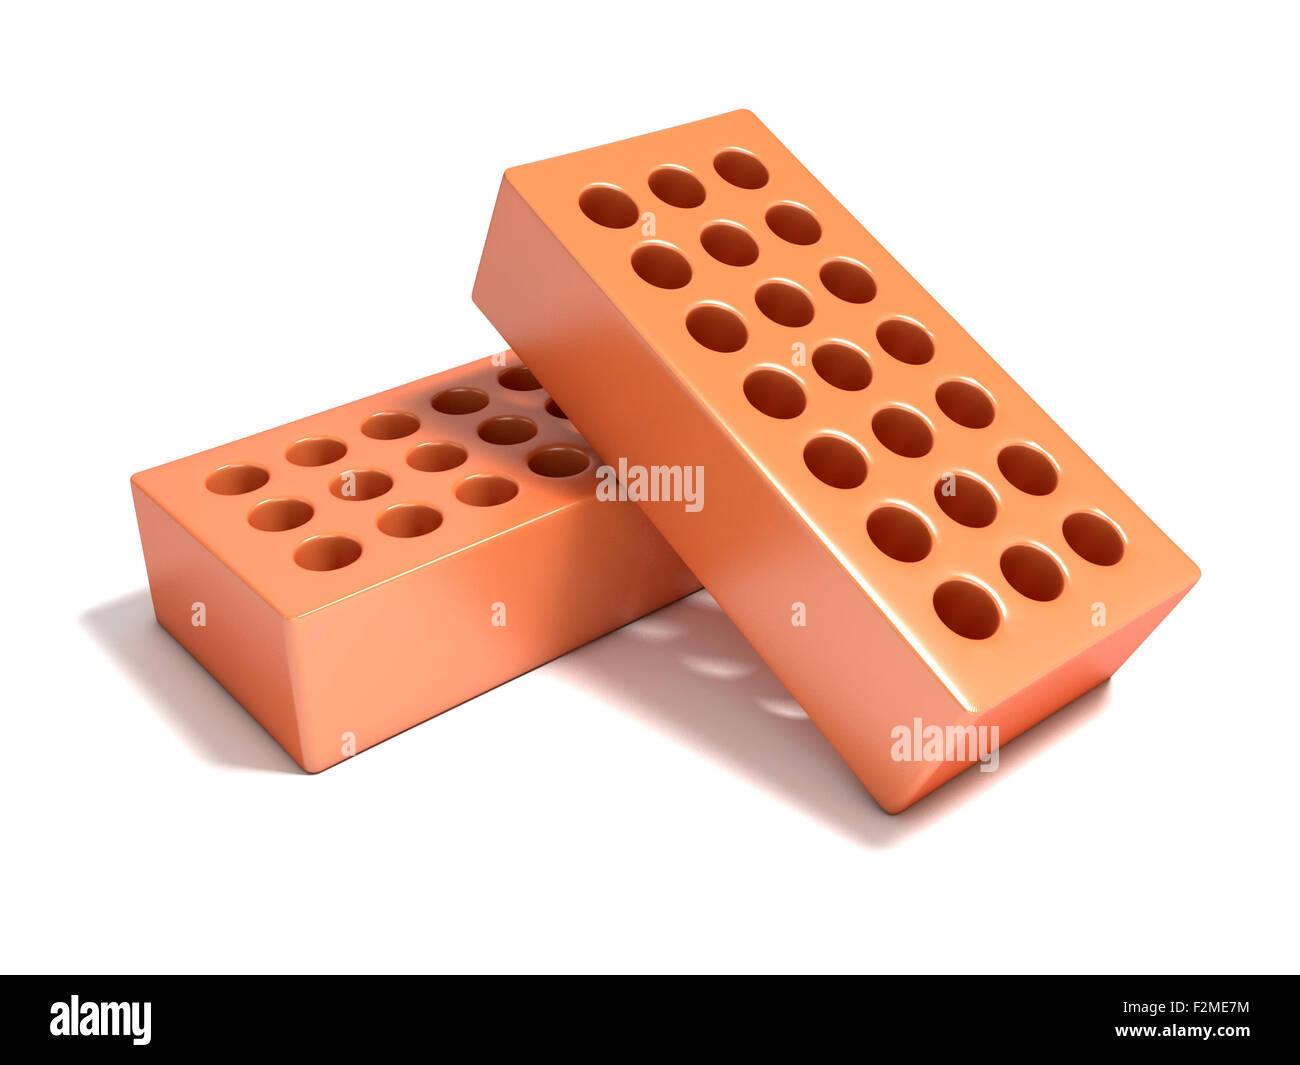 Two red bricks with round holes. 3D render illustration isolated on a white background. Stock Photo